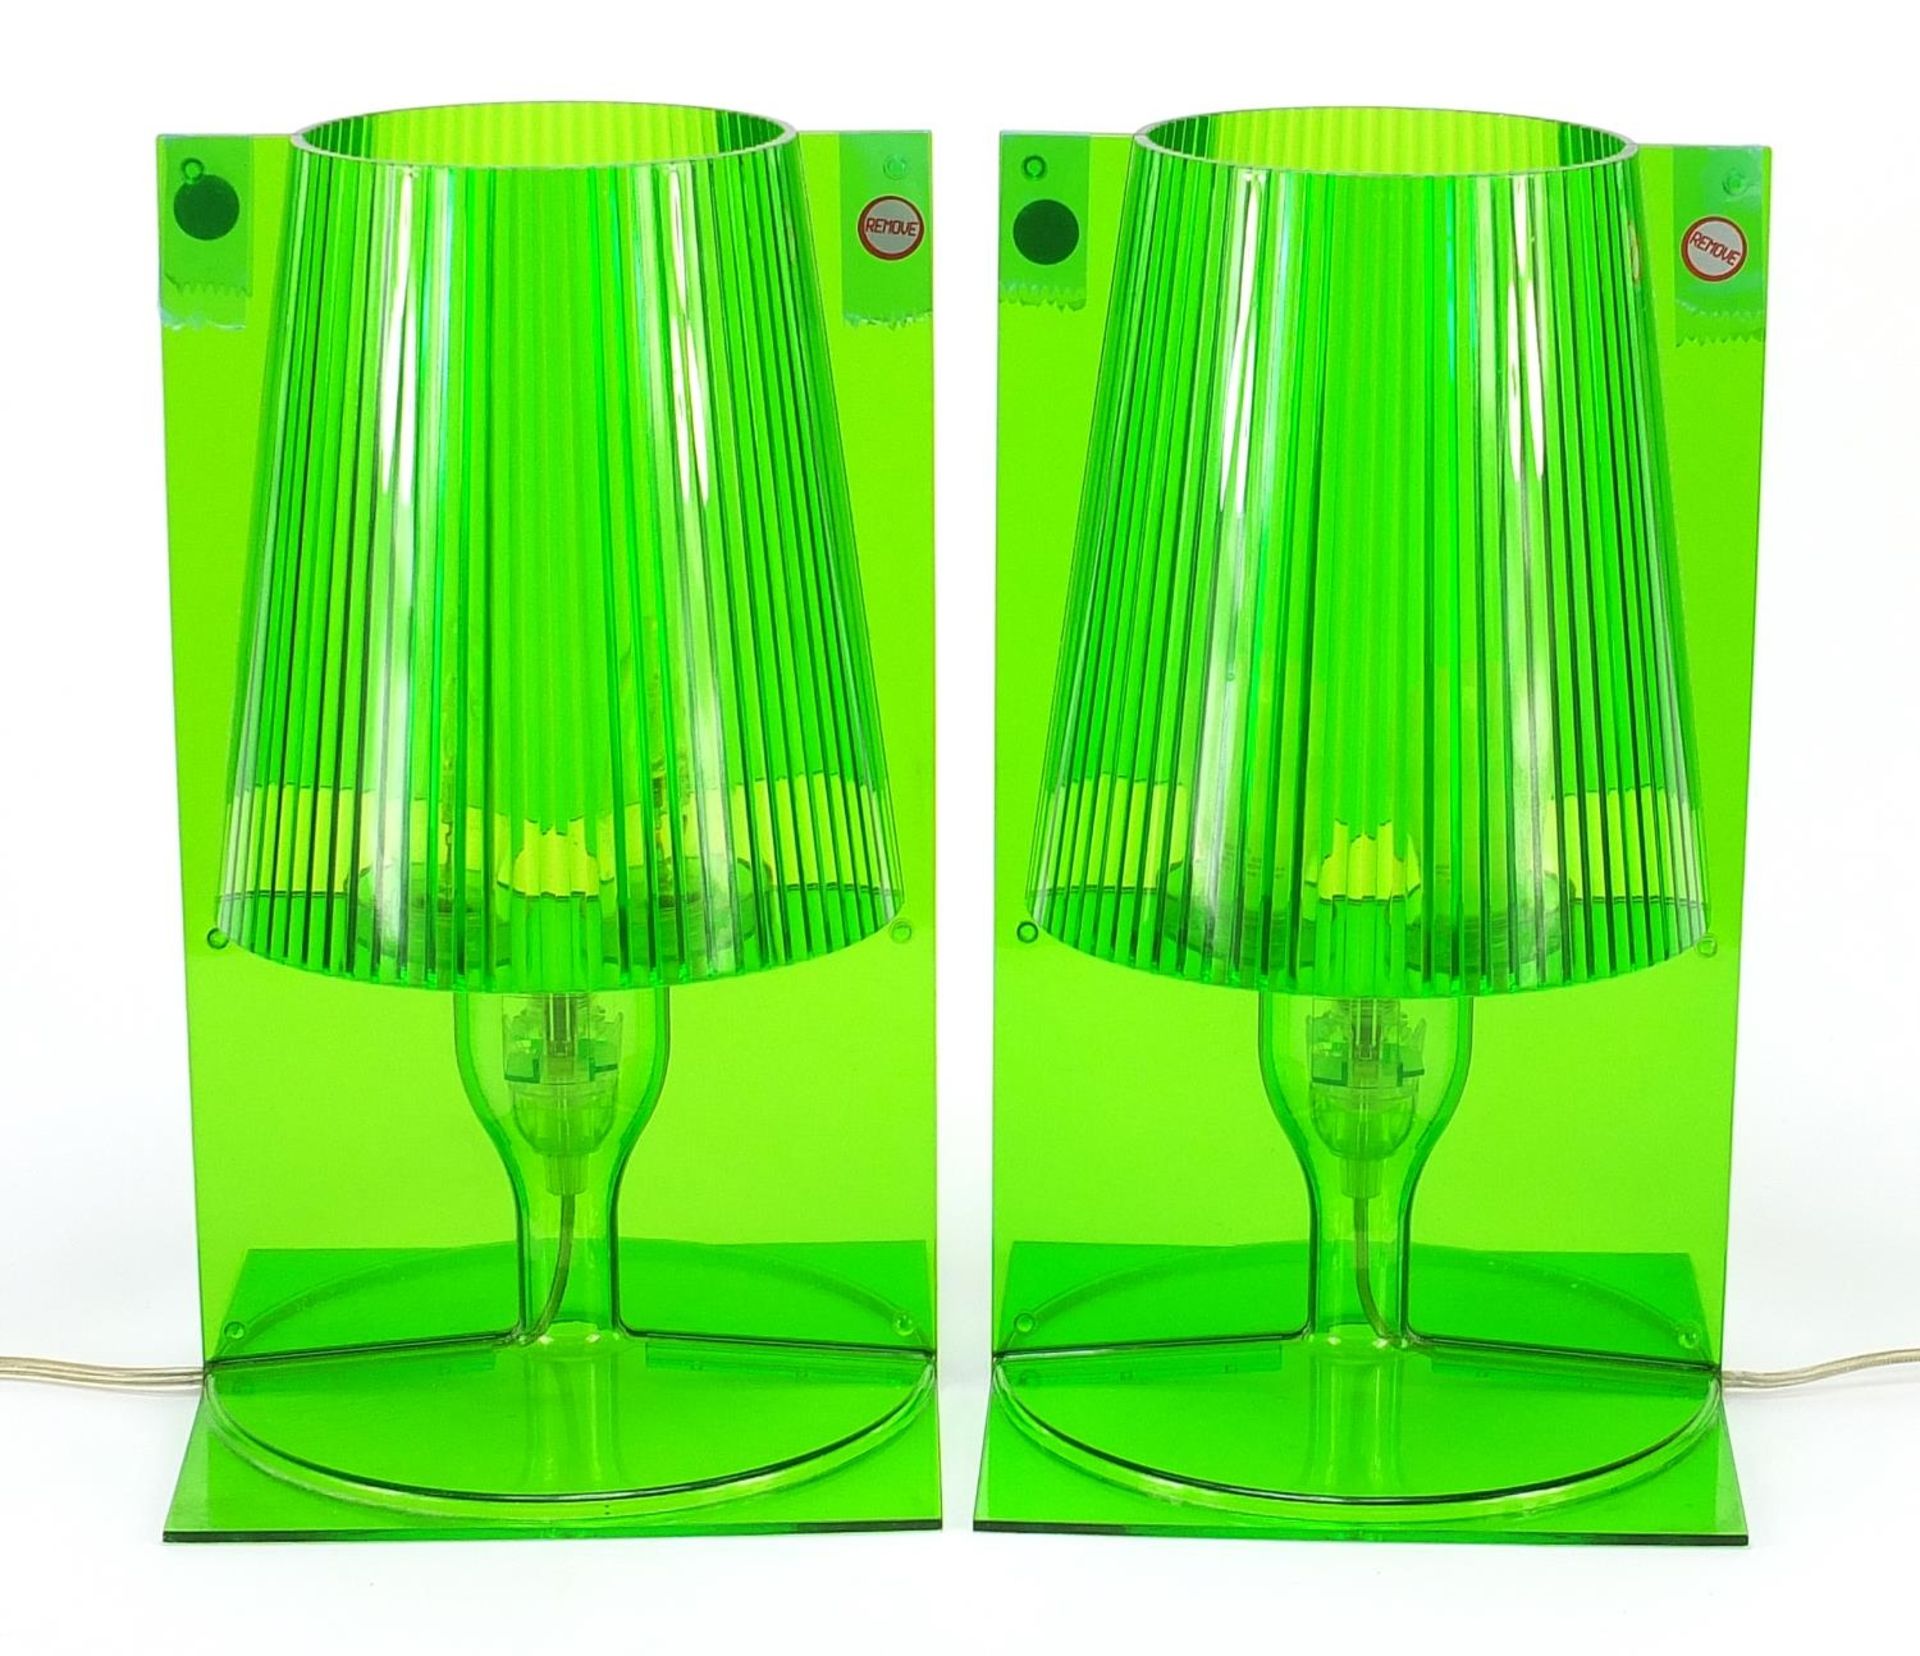 Ferruccio Laviani for Kartell, Pair of Take green Perspex table lamps, 30cm high - Image 2 of 4